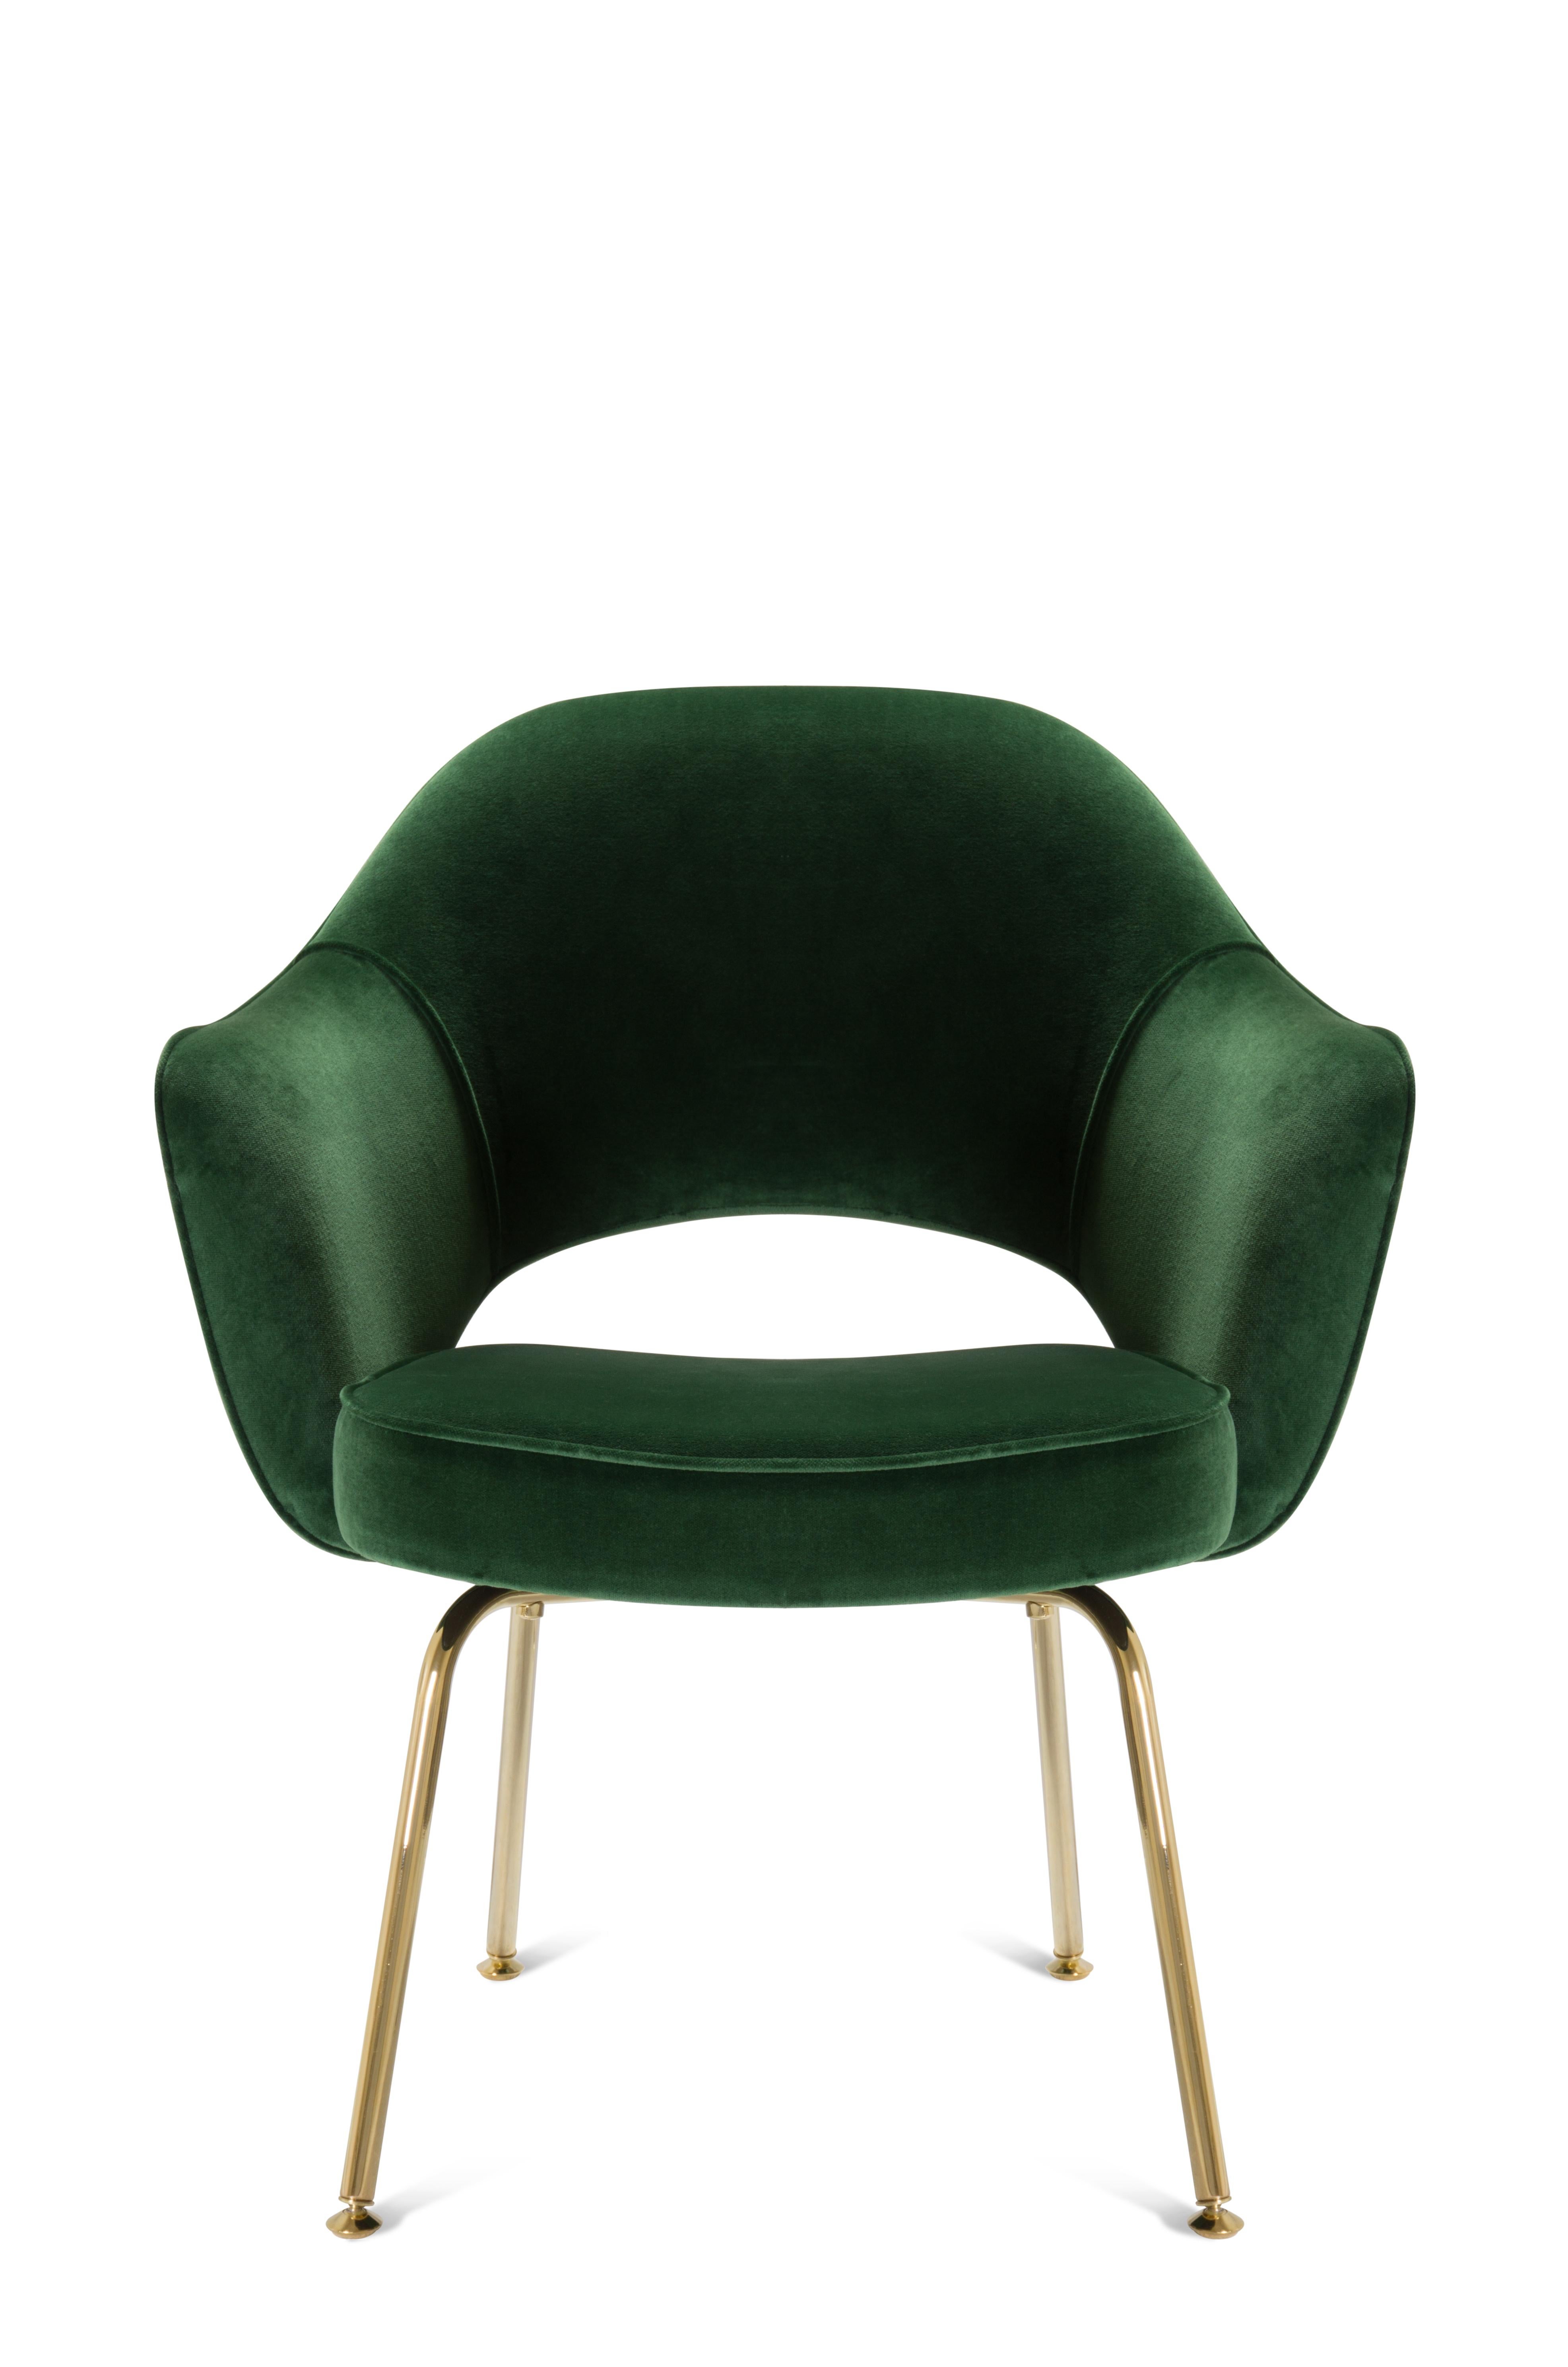 Mid-Century Modern Saarinen Executive Arm Chairs in Emerald Velvet, Gold Edition, Set of 6 For Sale